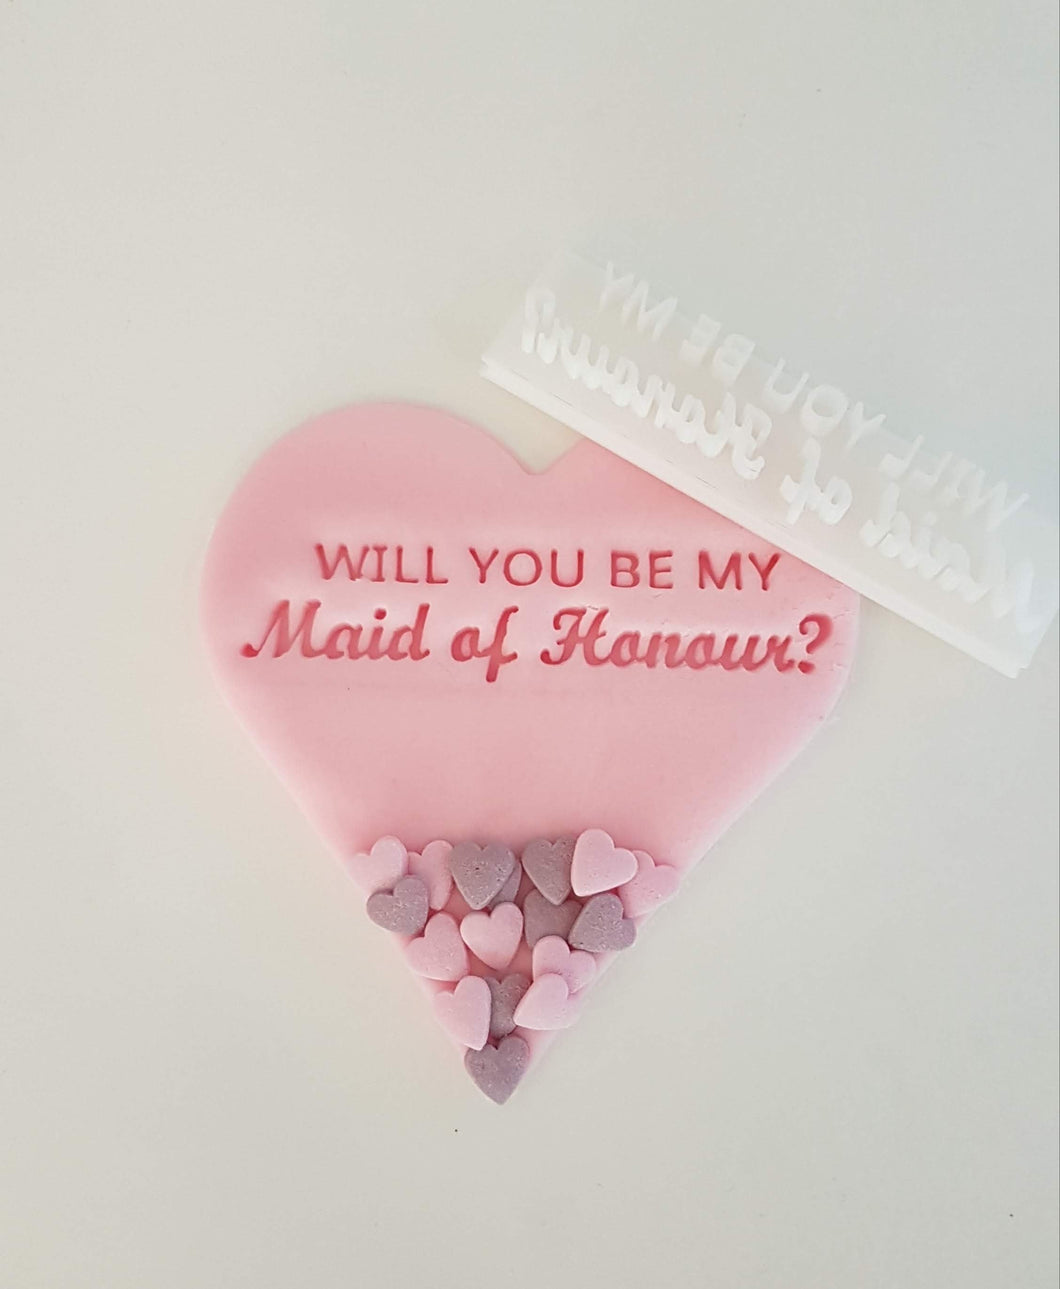 Will you be my Maid of Honour/Honor? Embosser Stamp|Baking|Cookie Stamp|Bridal Shower|Hen Party Do|Wedding|